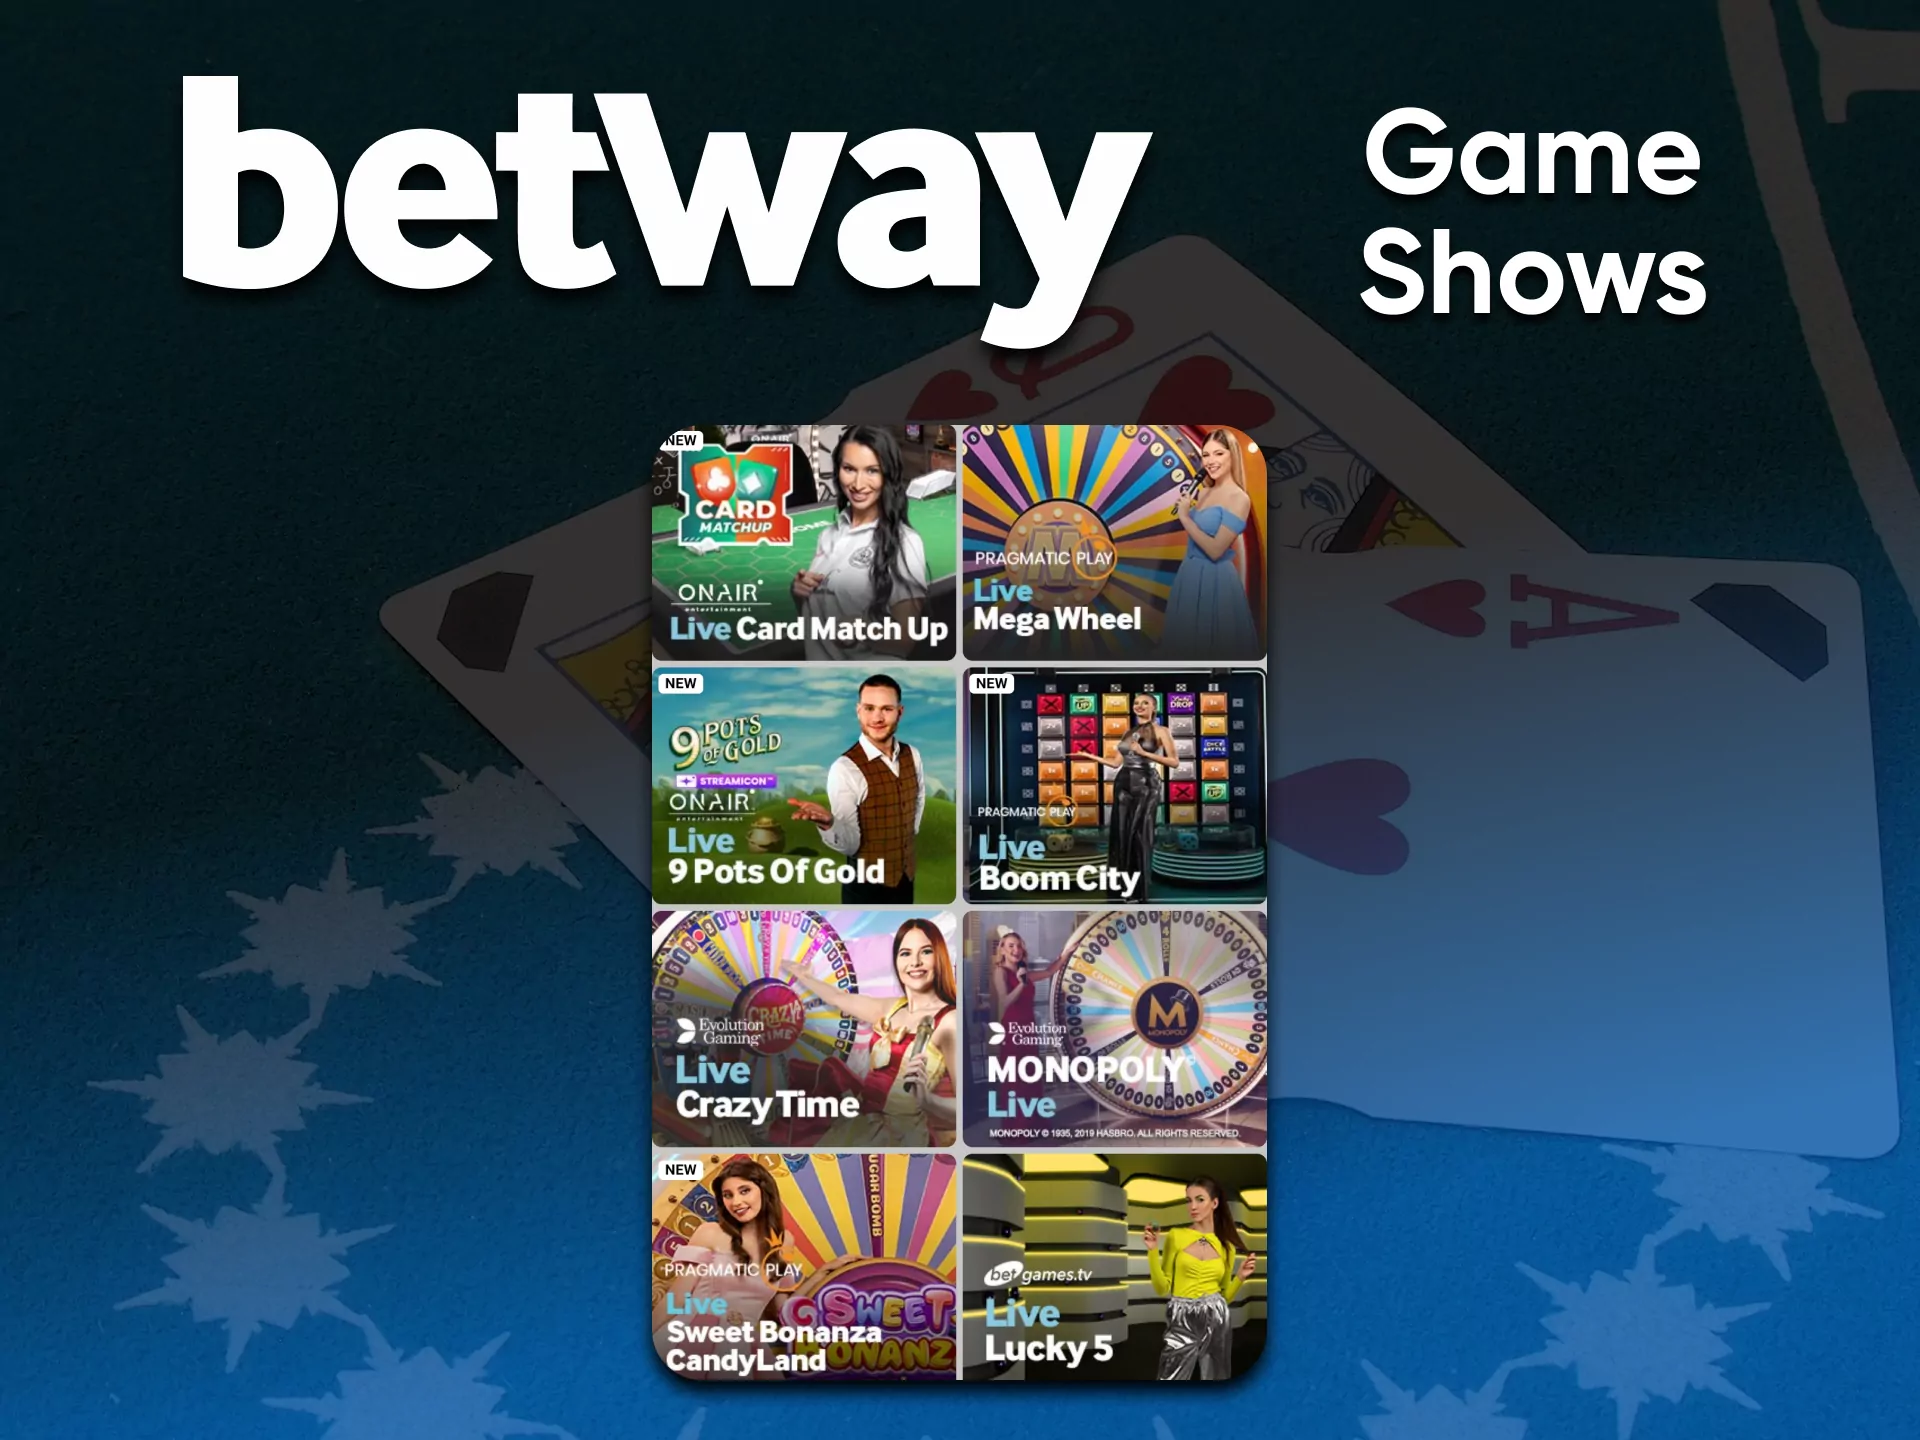 In the Betway casino, you can watch and play Game Shows.